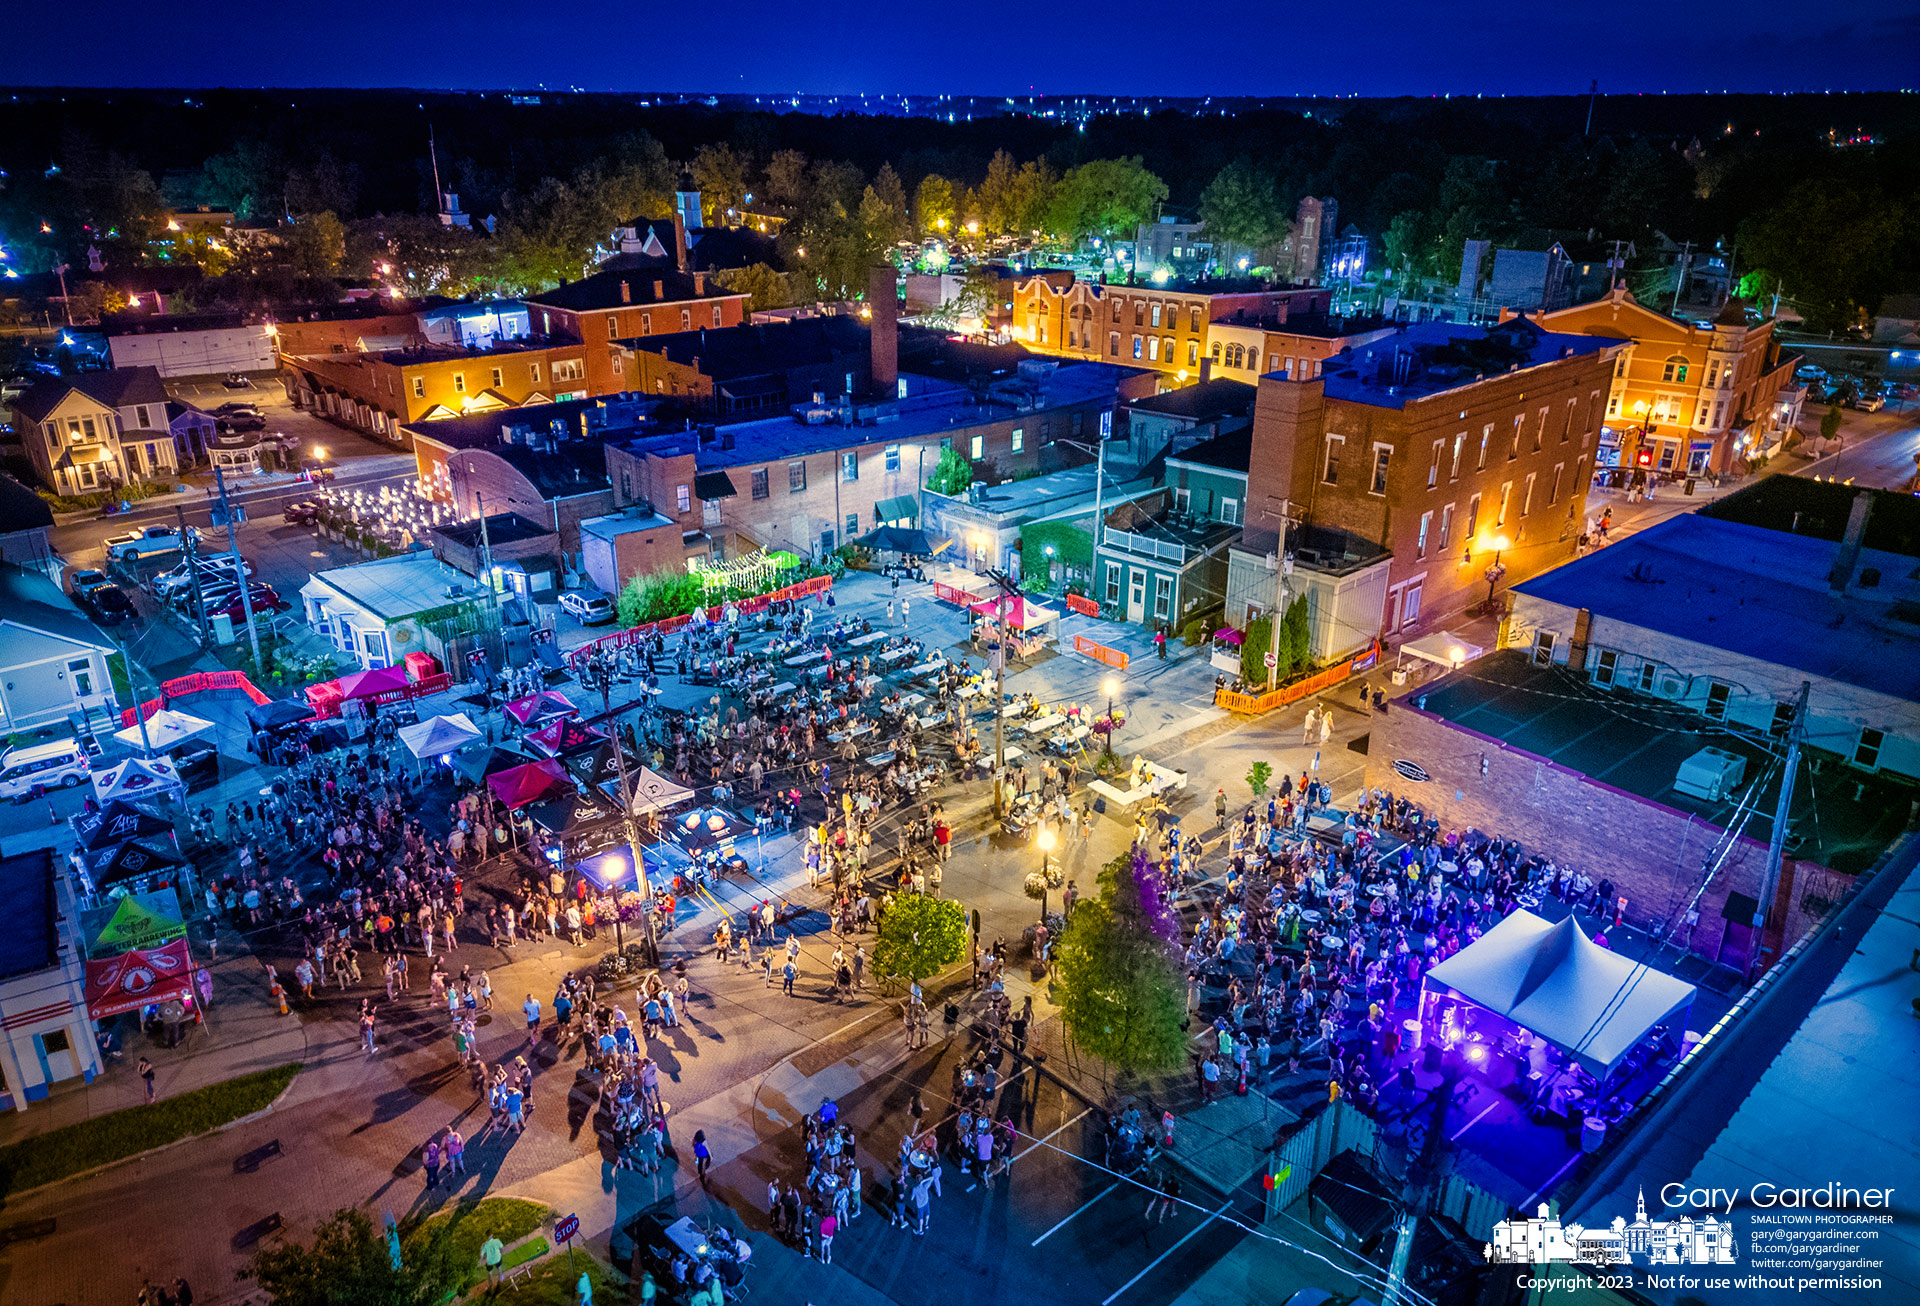 A crowd celebrating Uptown Untapped fills parking lots along East Main Street closed for the annual craft beer festival in the home of the Anti-Saloon League and Prohibition. My Final Photo for August 12, 2023.